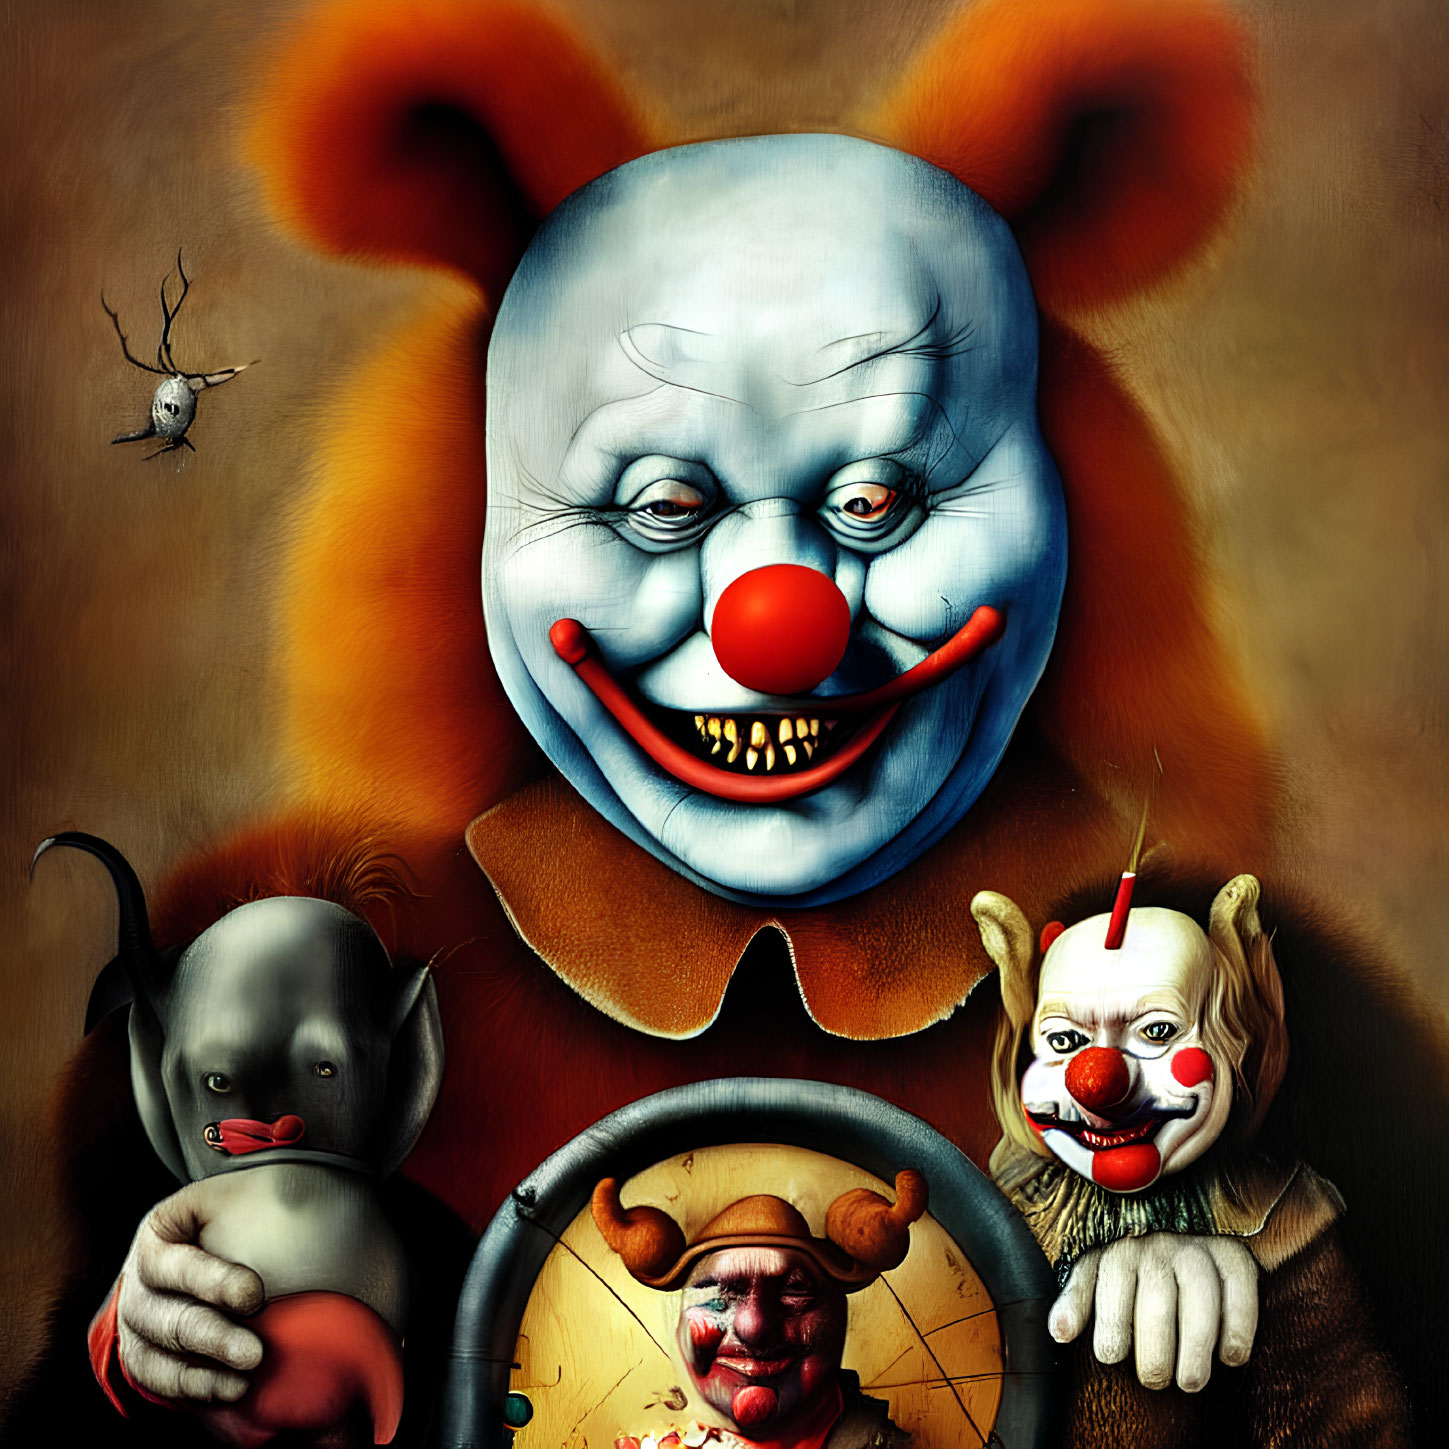 Surreal clown illustration with exaggerated features and eerie companions